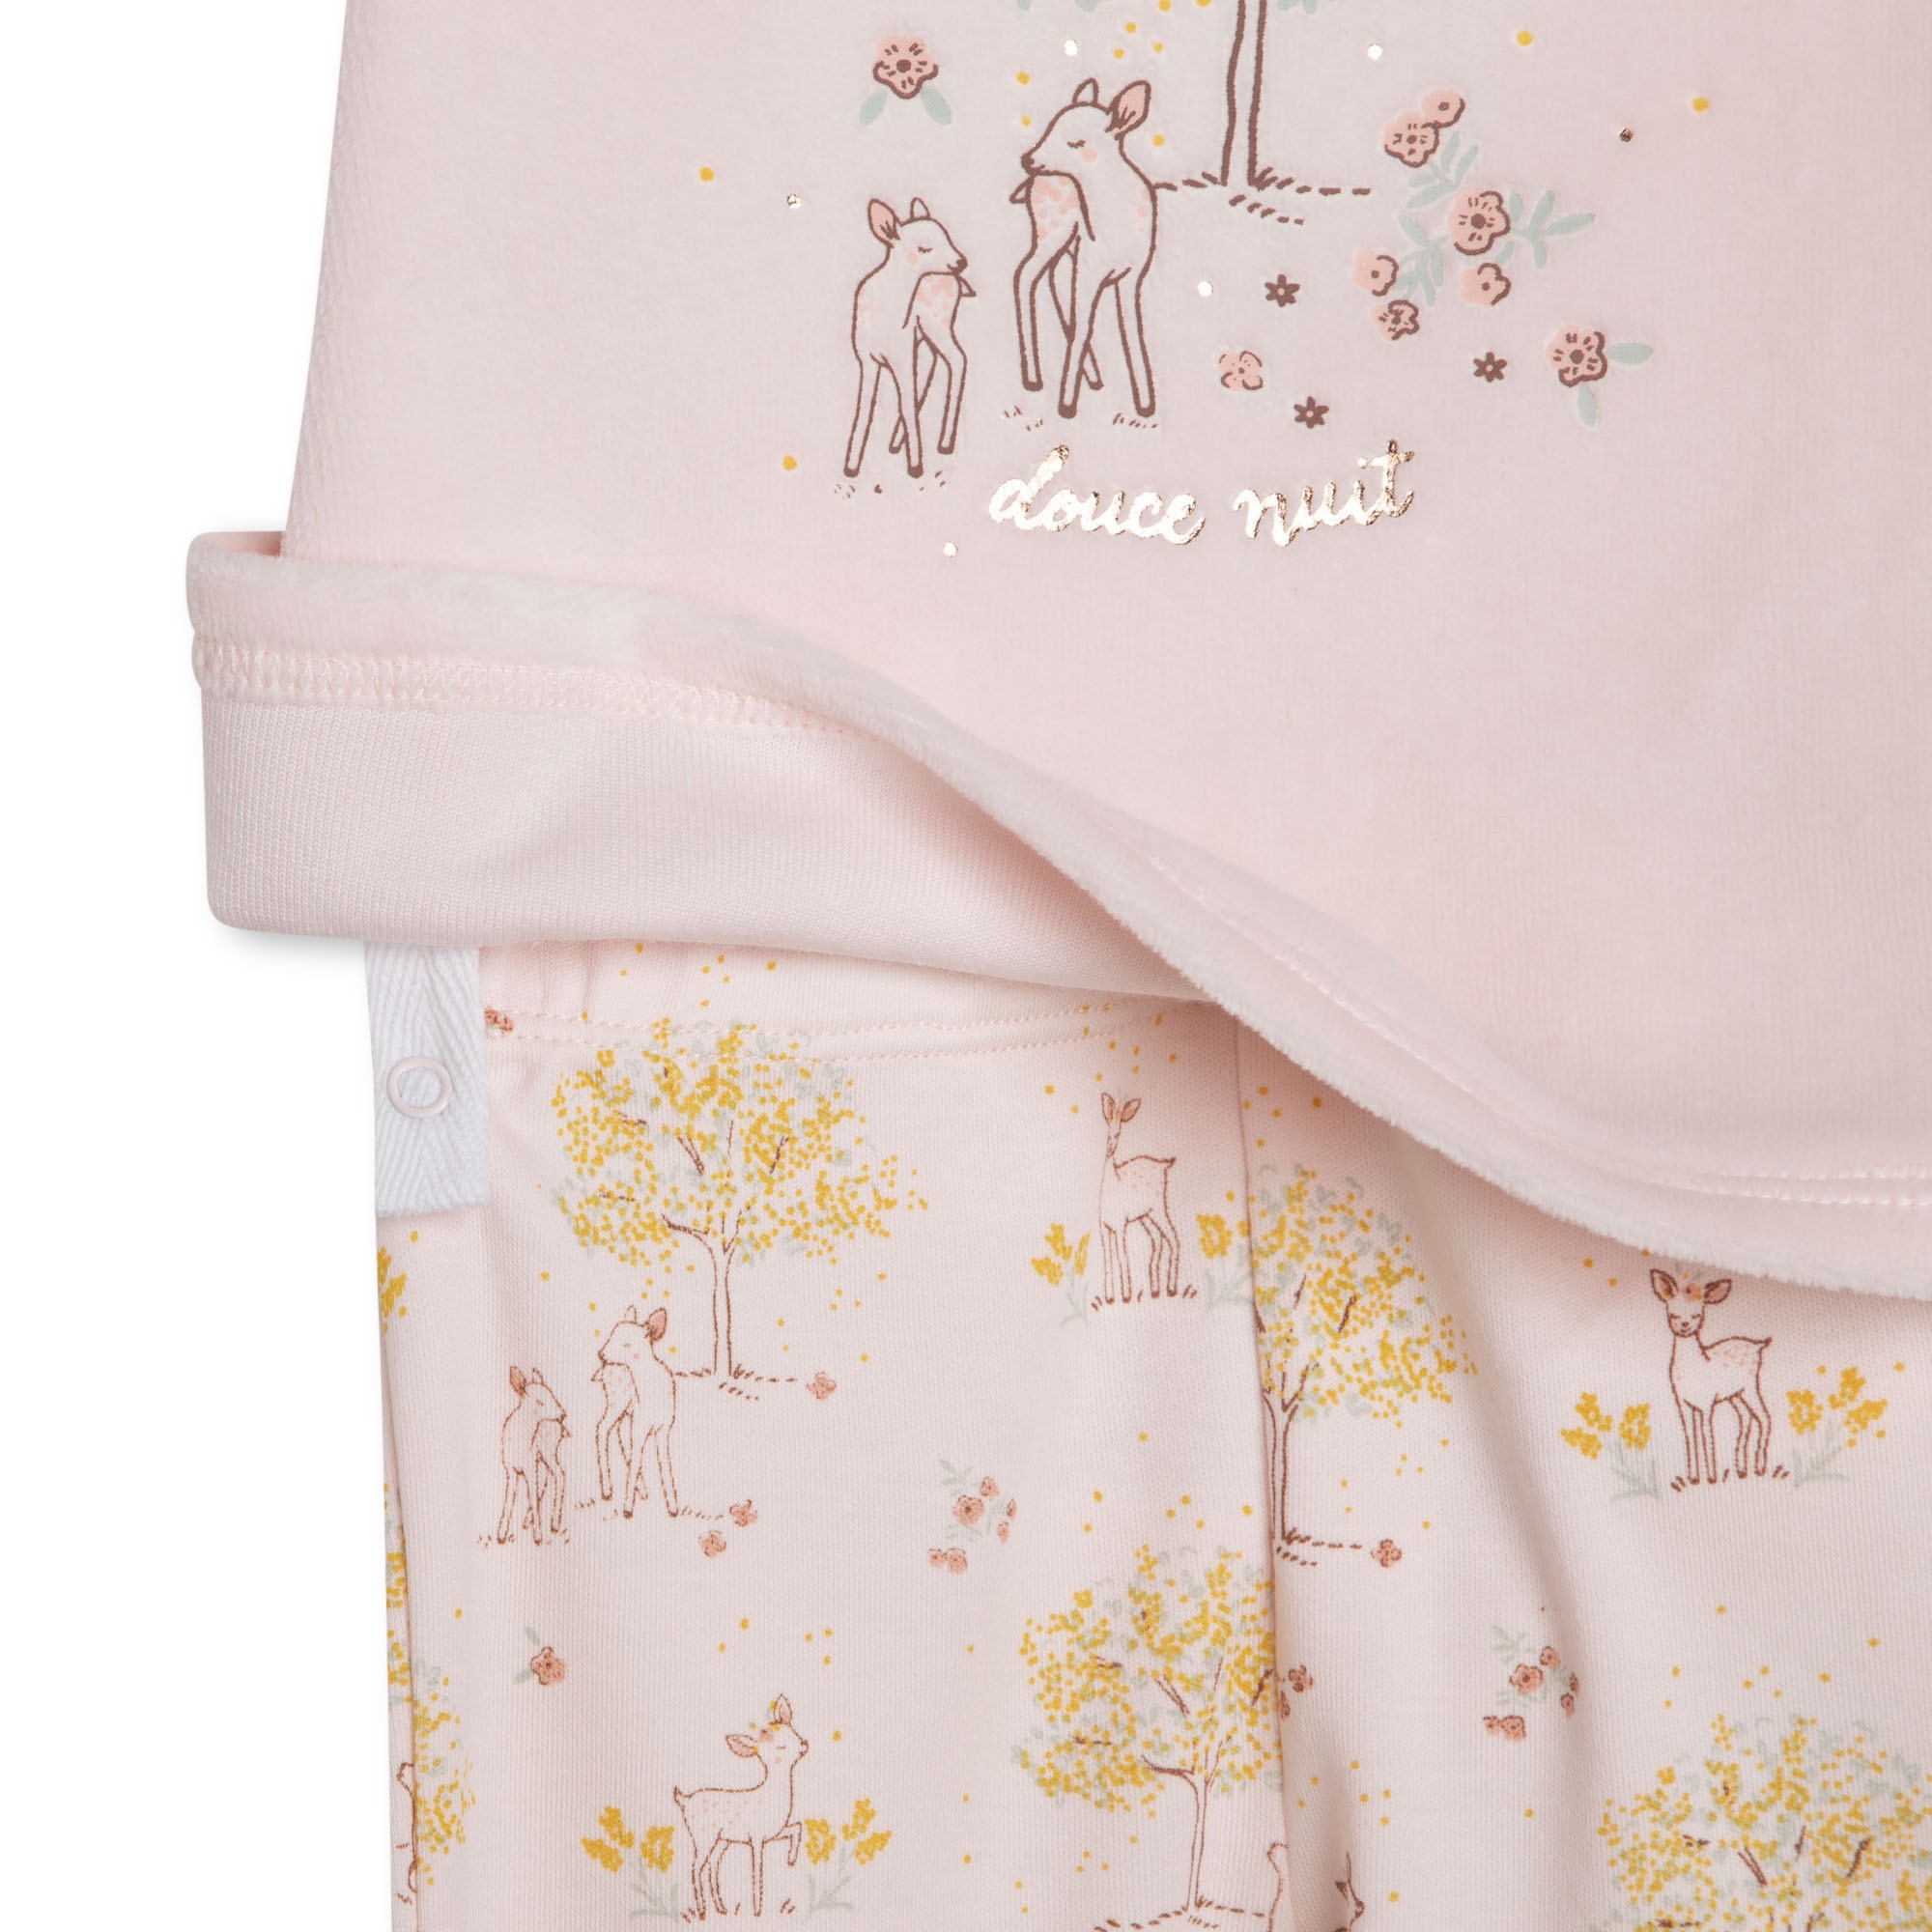 Two-Piece Pajama Set CARREMENT BEAU for GIRL